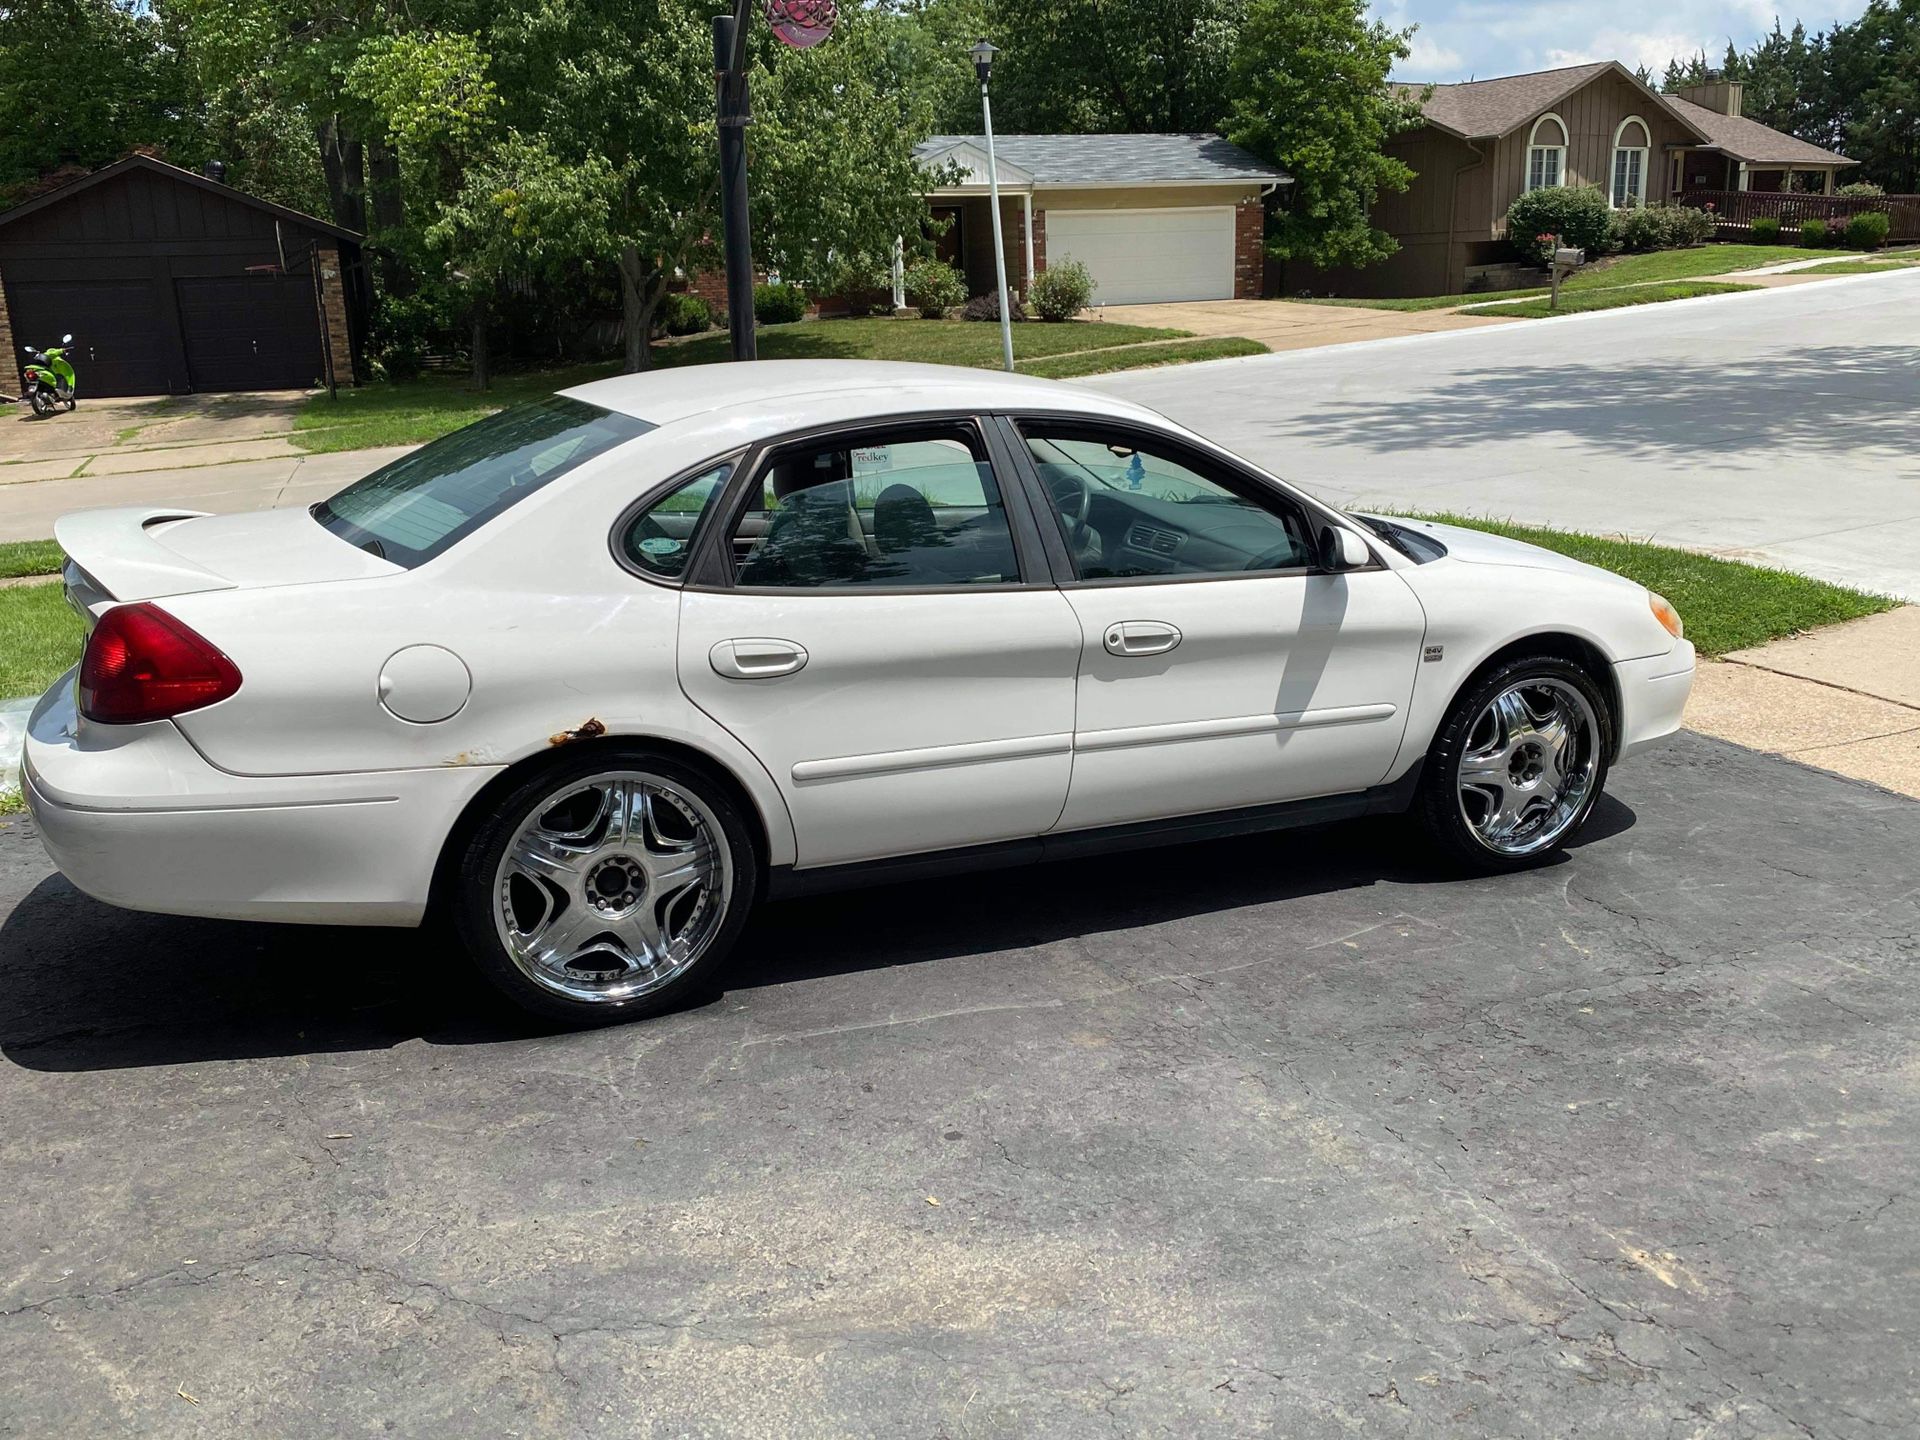 2003 Ford Taurus For Sale In Saint Ann Mo Offerup